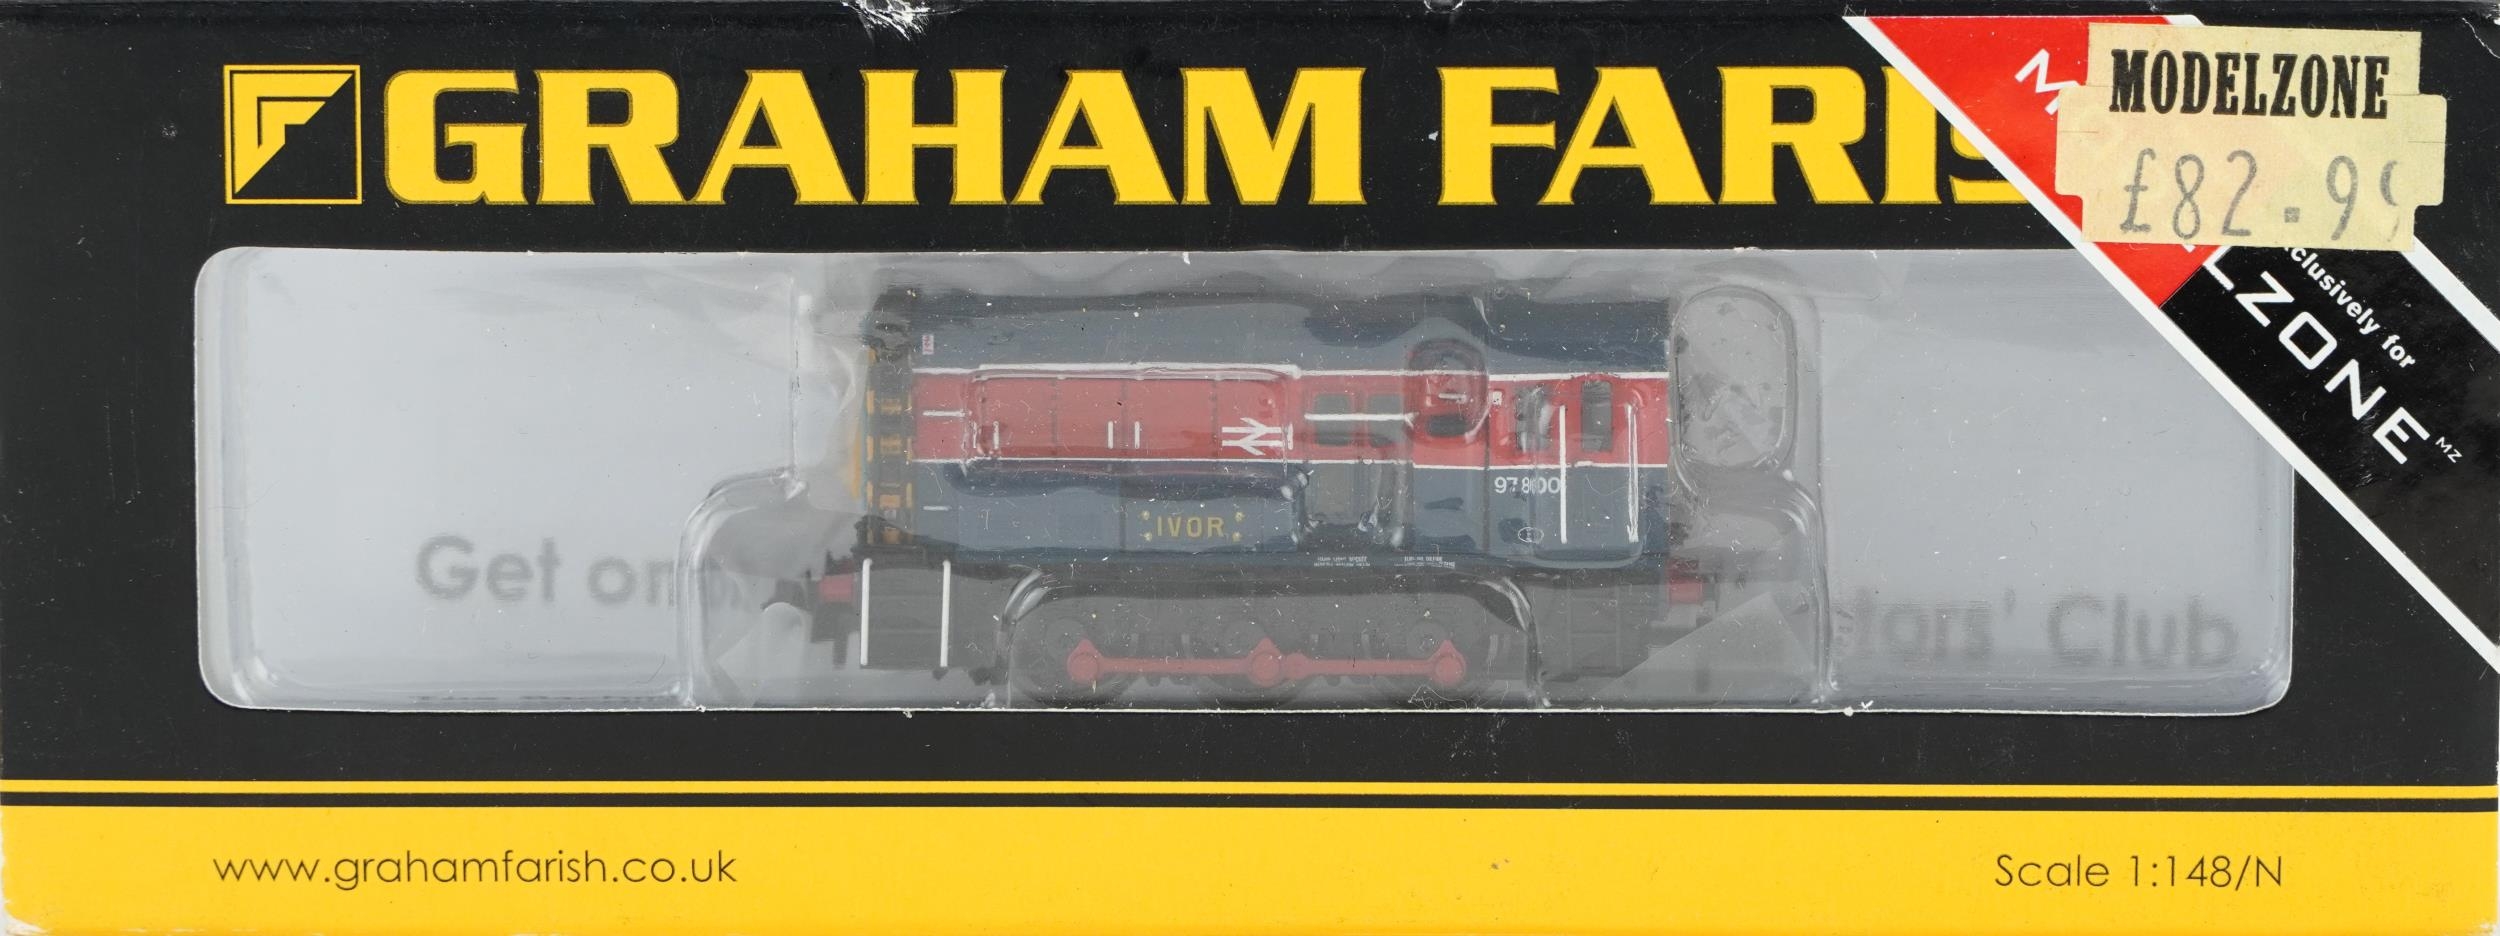 Two Graham Farish N gauge model railway locomotives with cases, numbers 371-020Z and 372-525 - Image 2 of 3